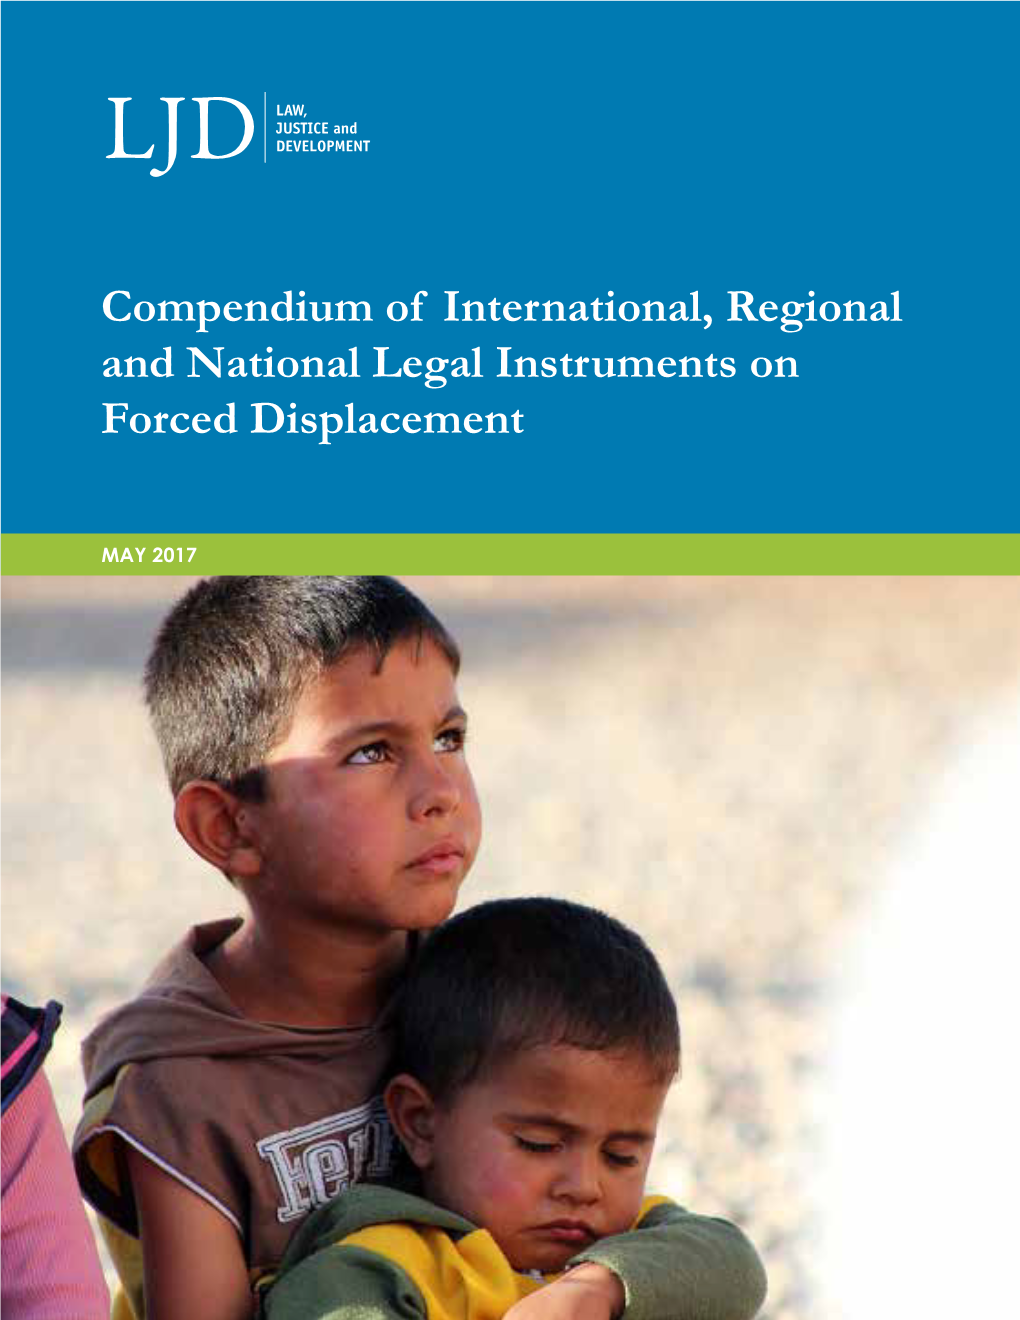 Compendium of International, Regional and National Legal Instruments on Forced Displacement